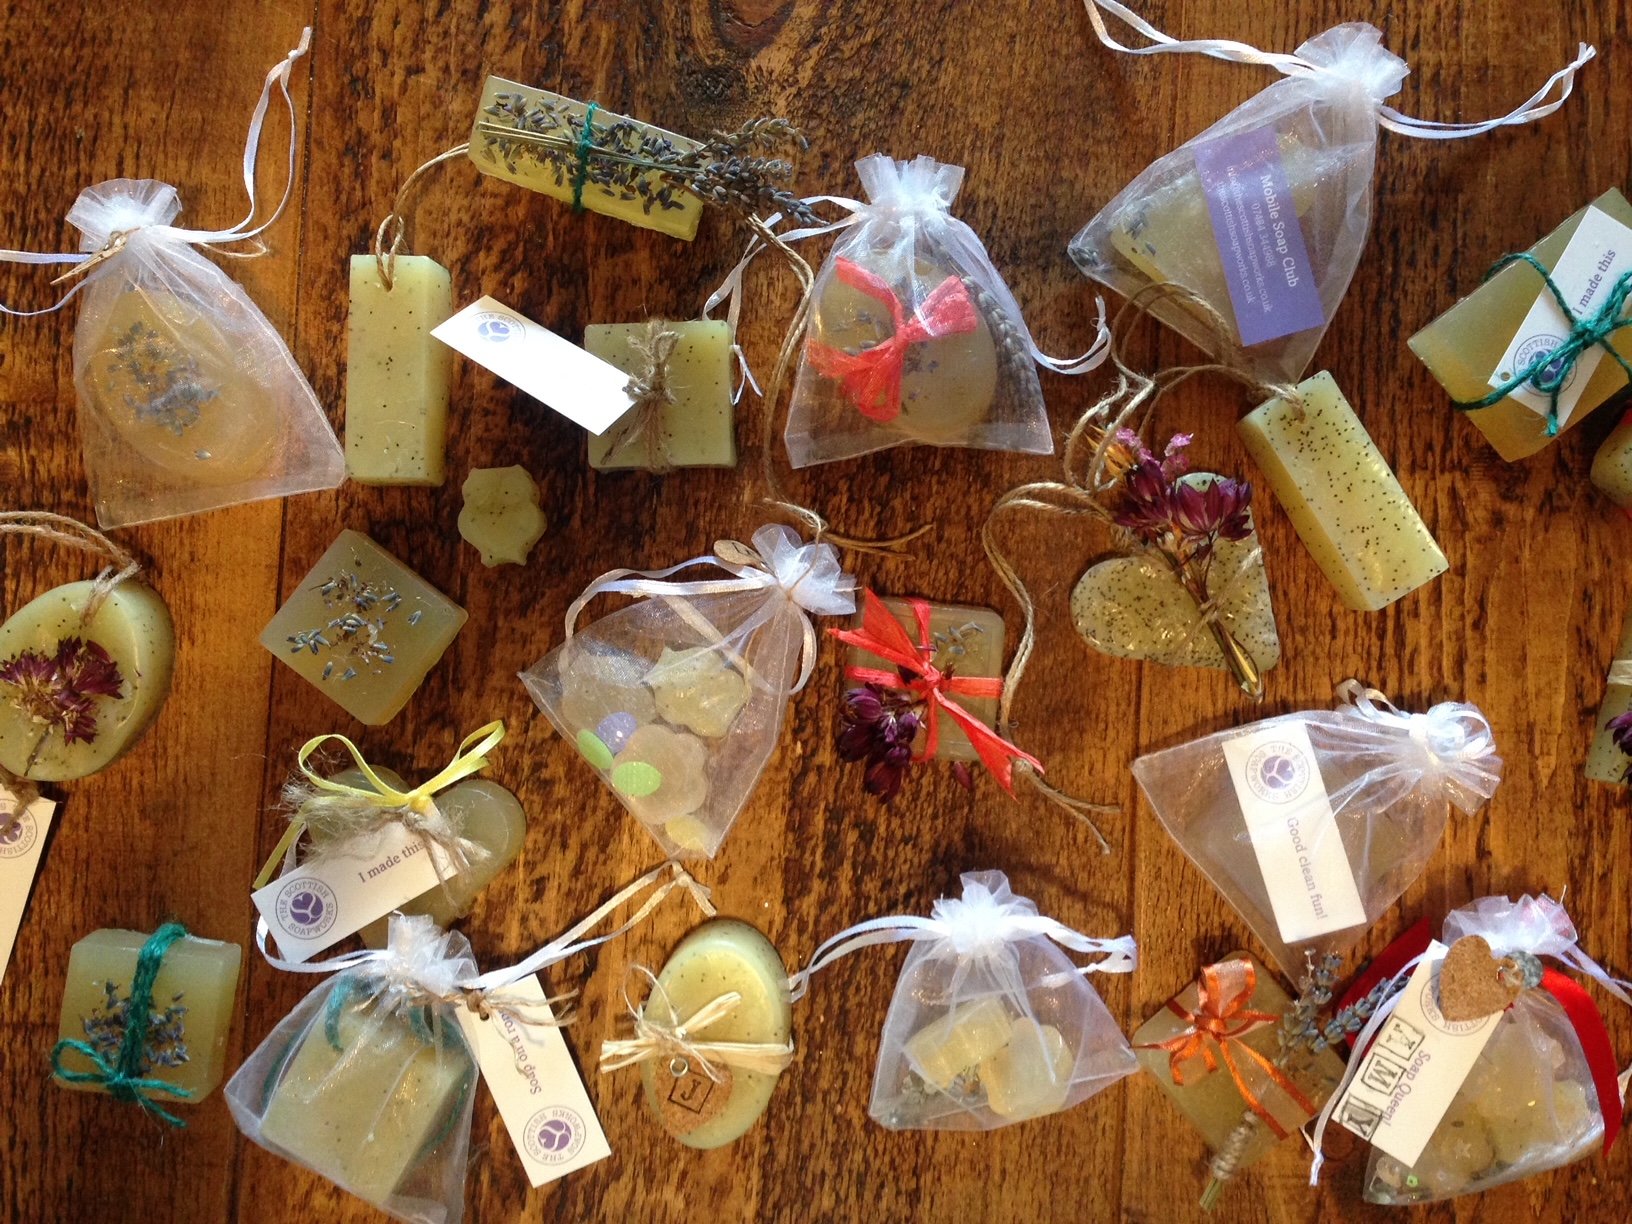 Festive Soap & Sip: a fun way to learn how to make your own soap